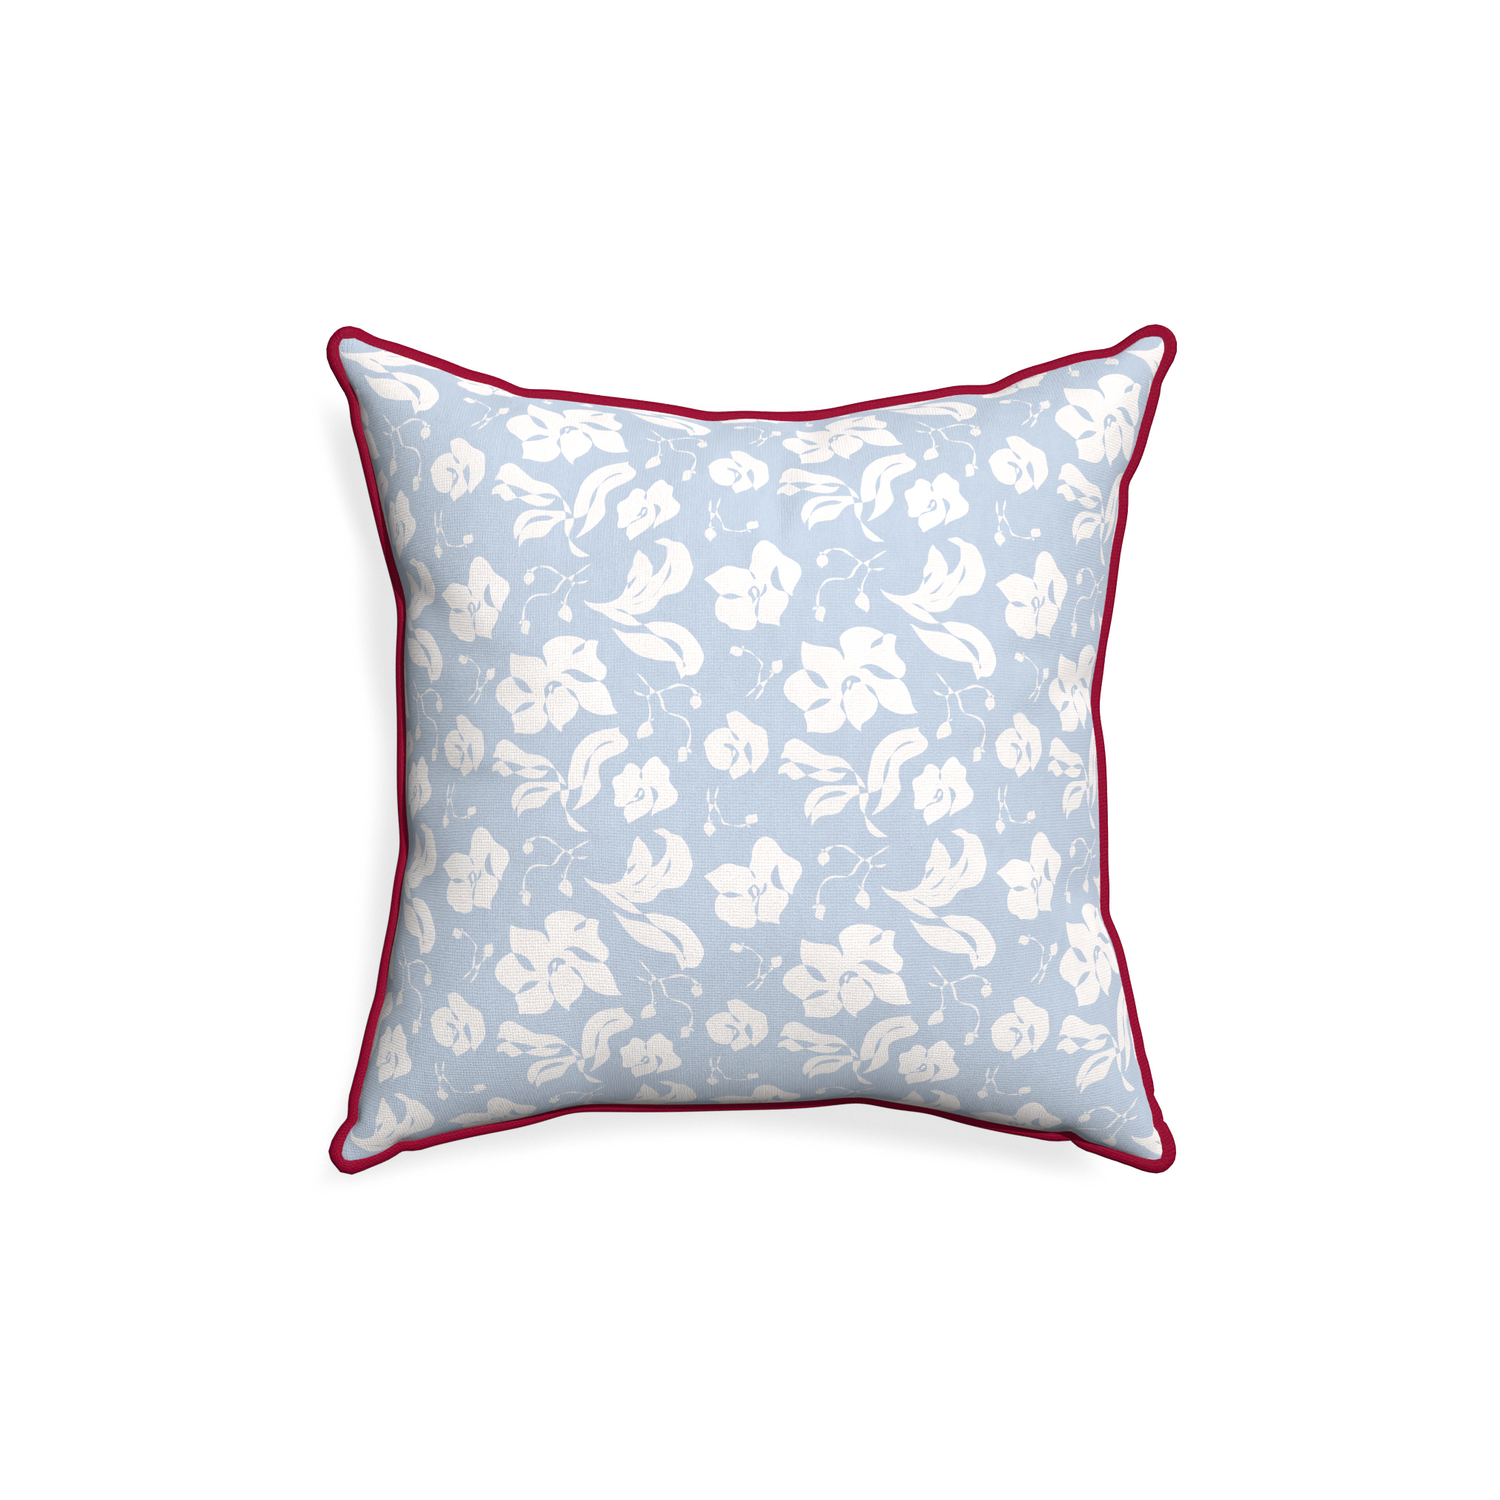 18-square georgia custom pillow with raspberry piping on white background